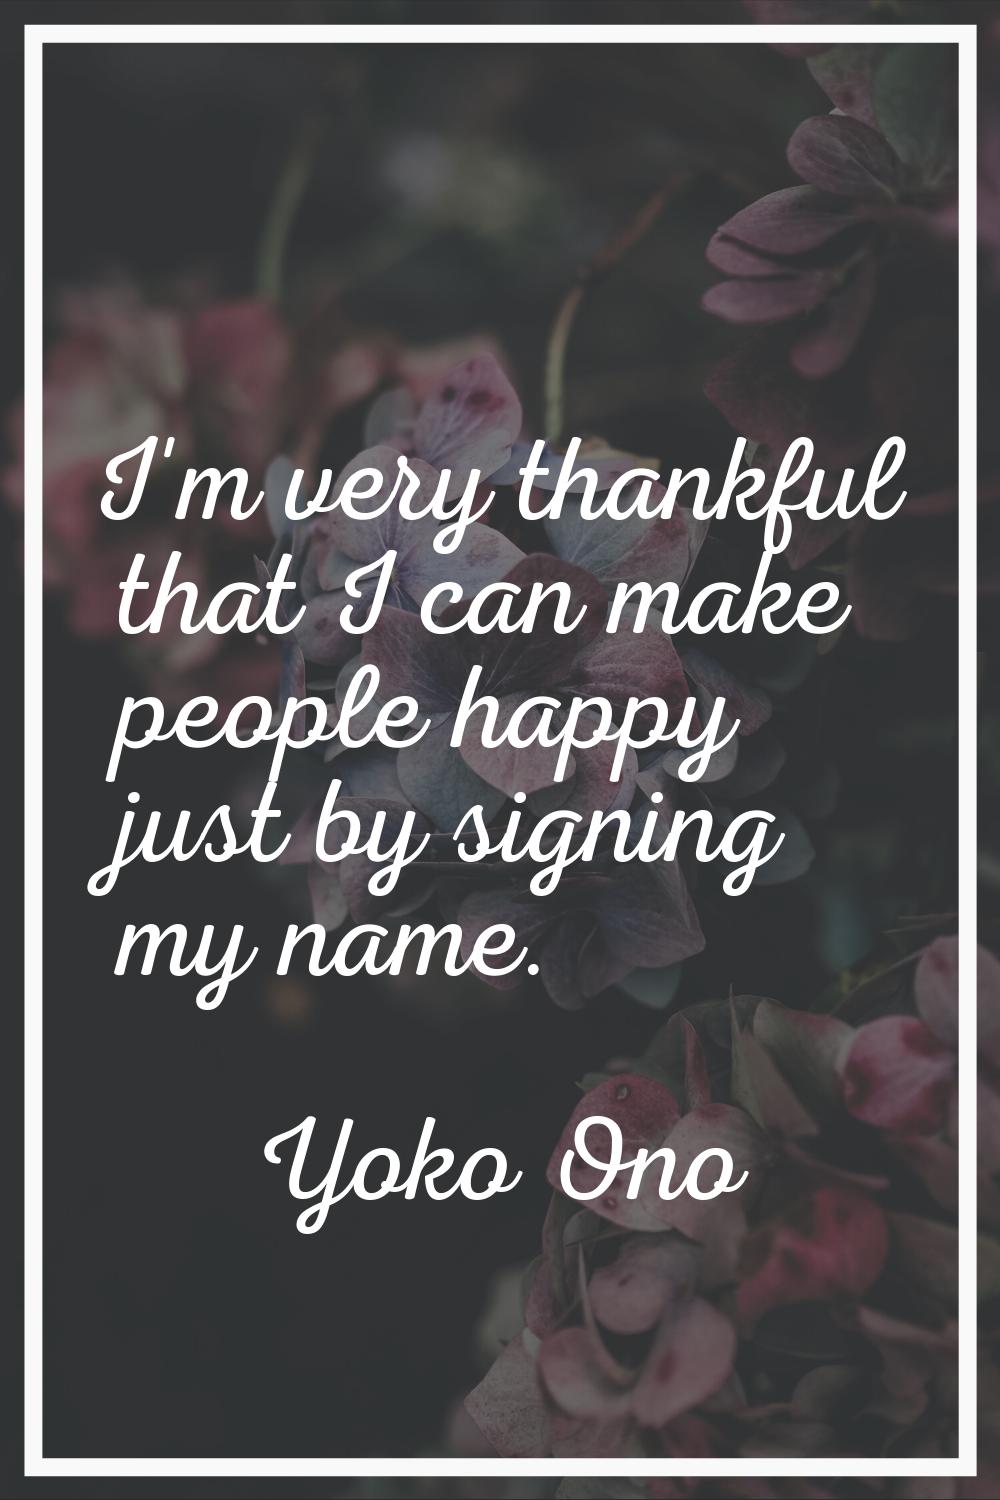 I'm very thankful that I can make people happy just by signing my name.